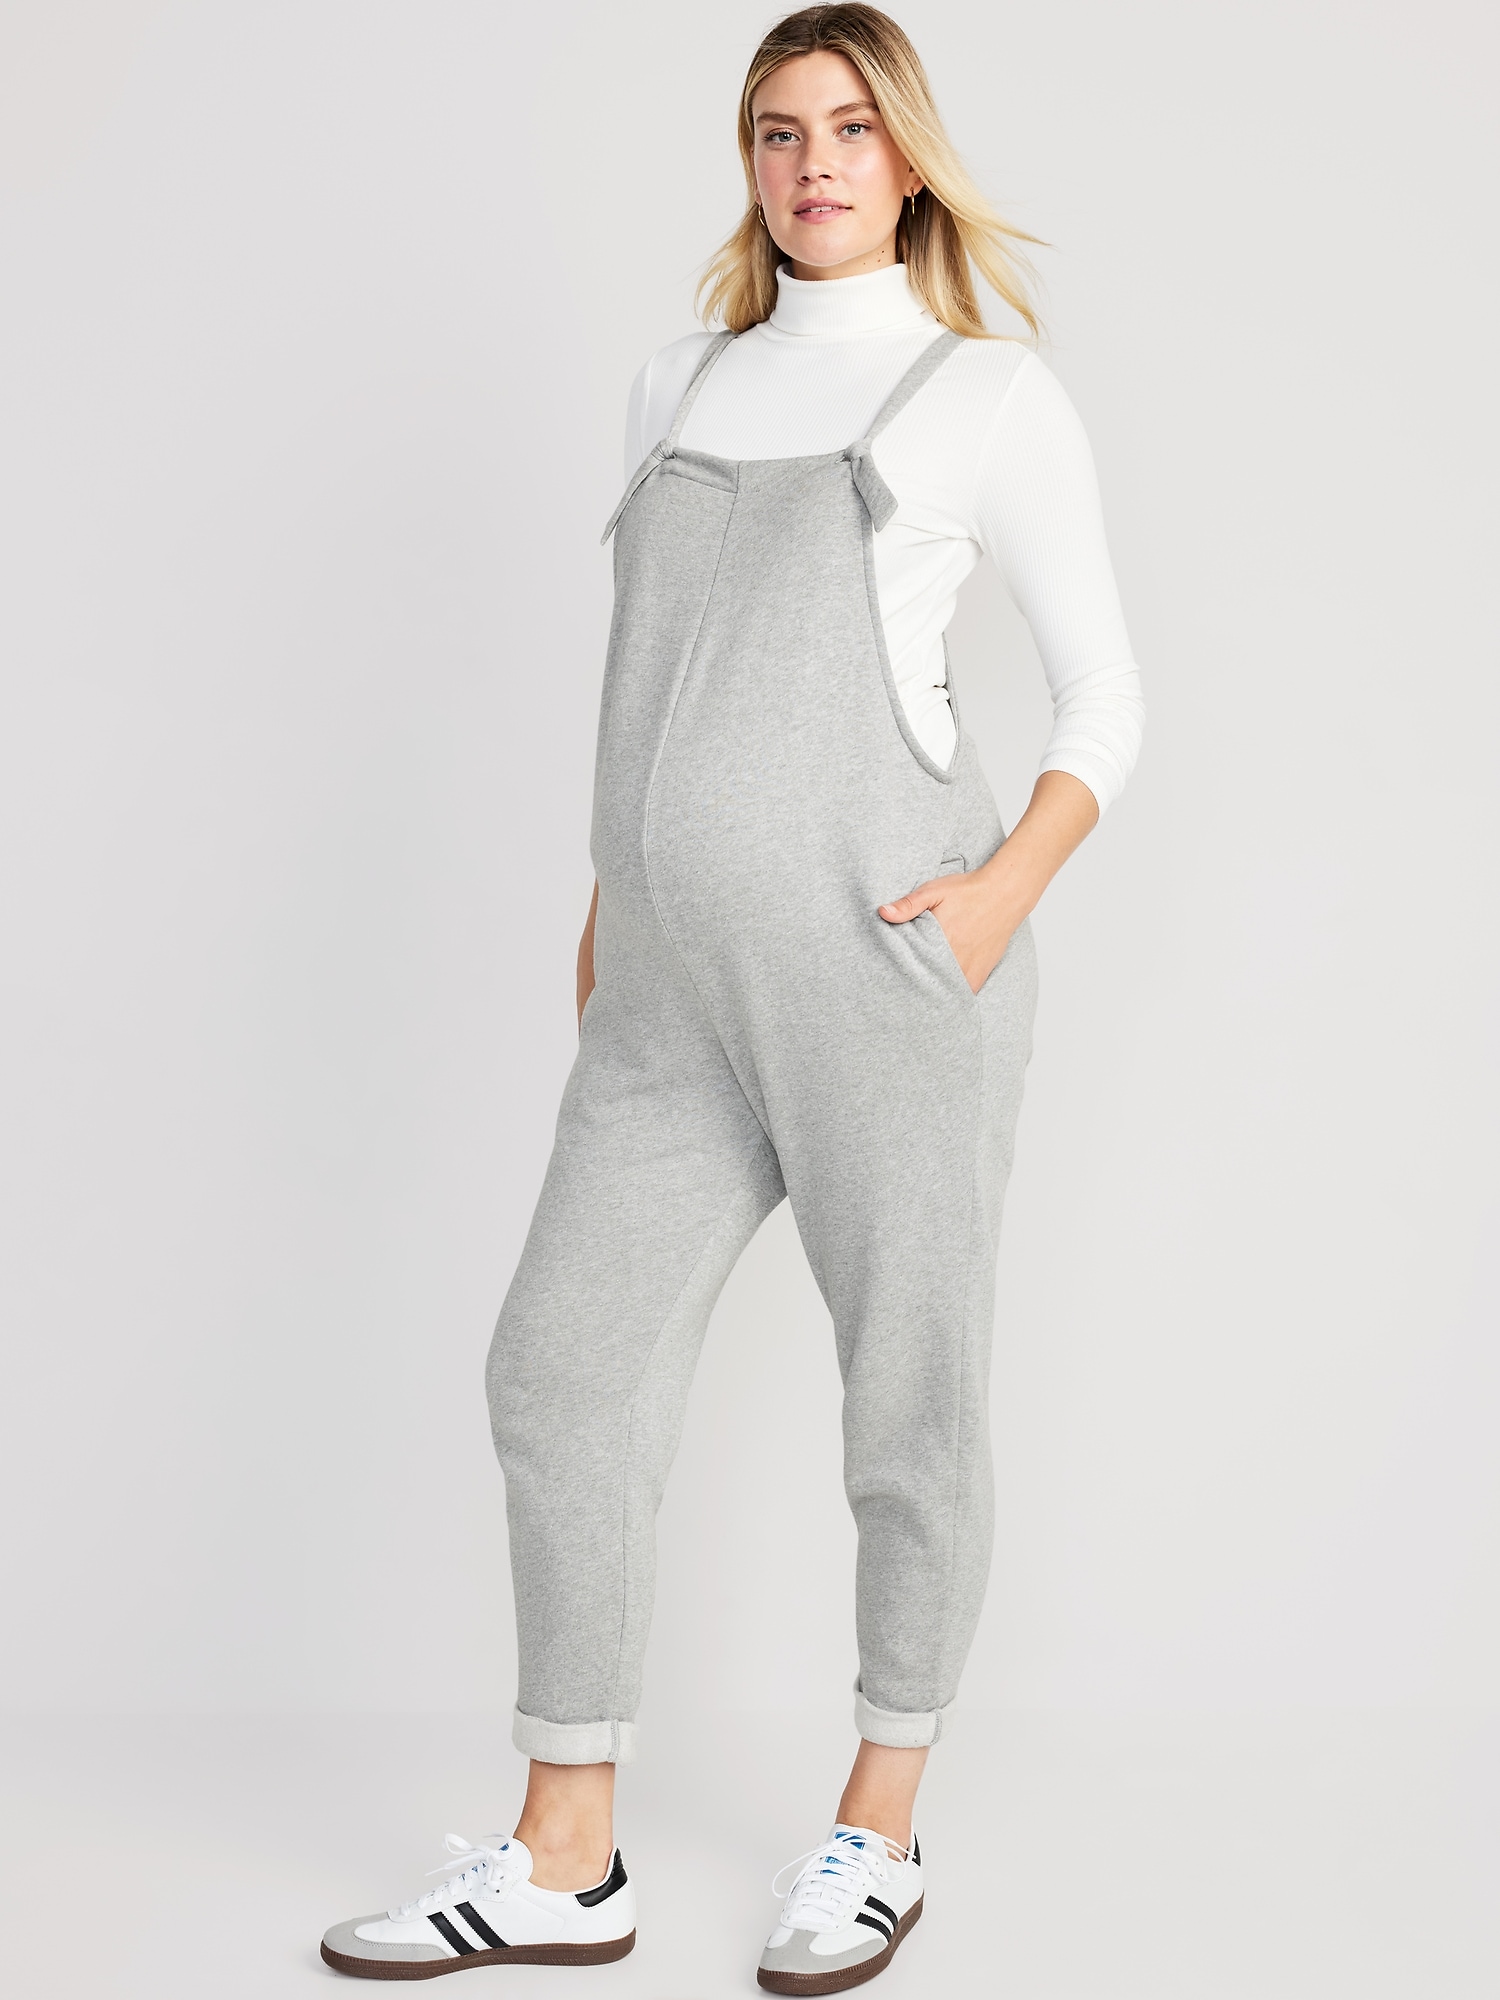 Maternity Knotted-Strap Fleece Overalls